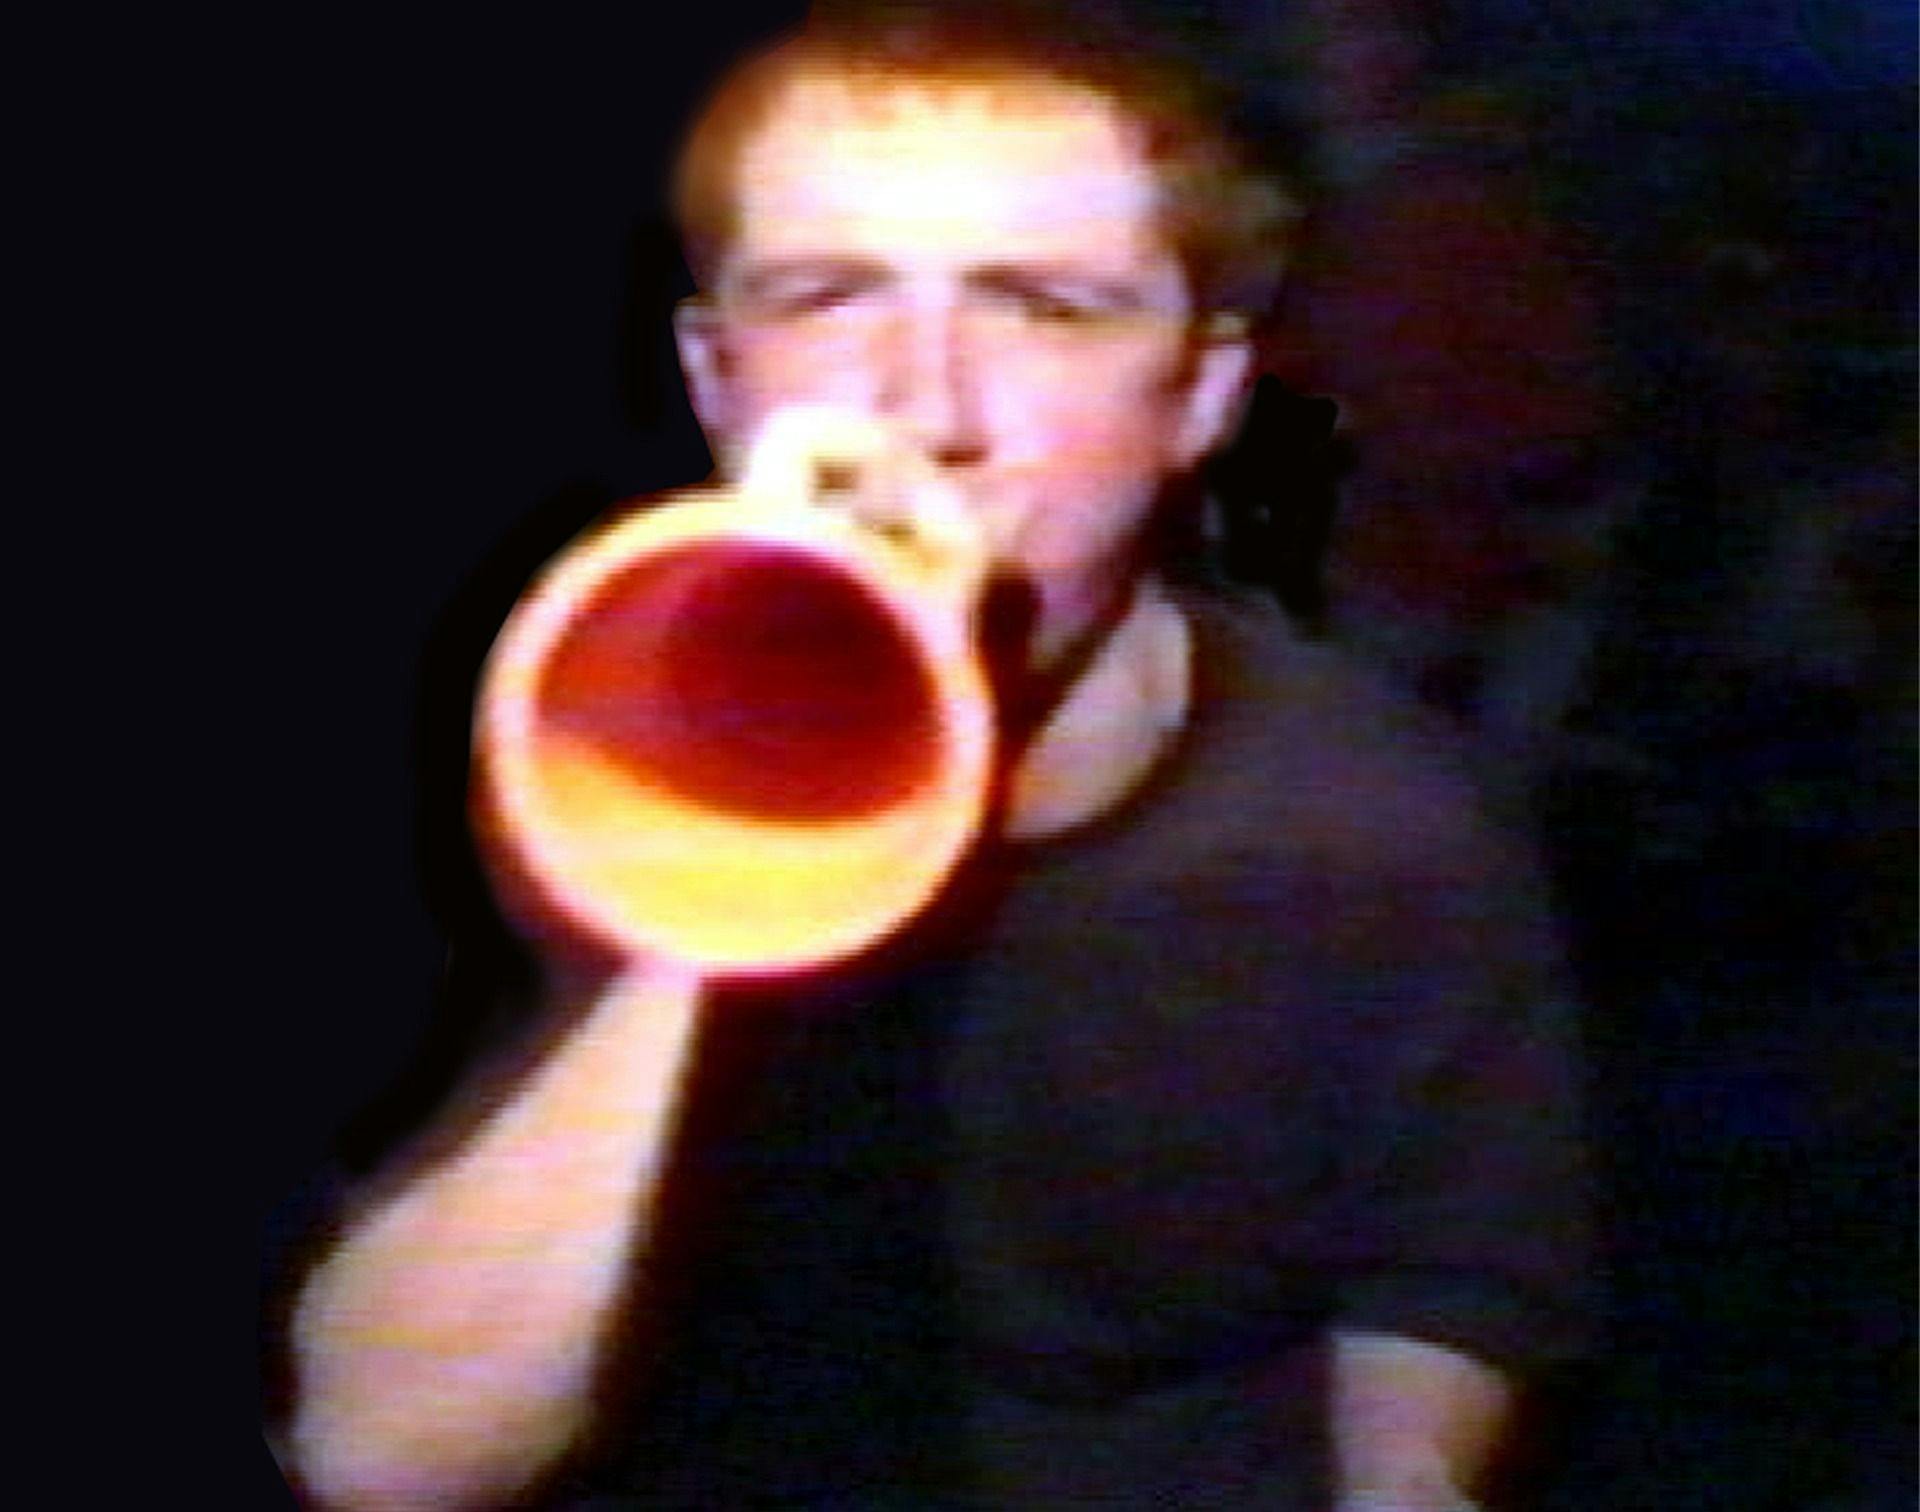 Image of a person with ginger hair and a black t-shirt blowing into a yellow horn whilst looking at the camera.